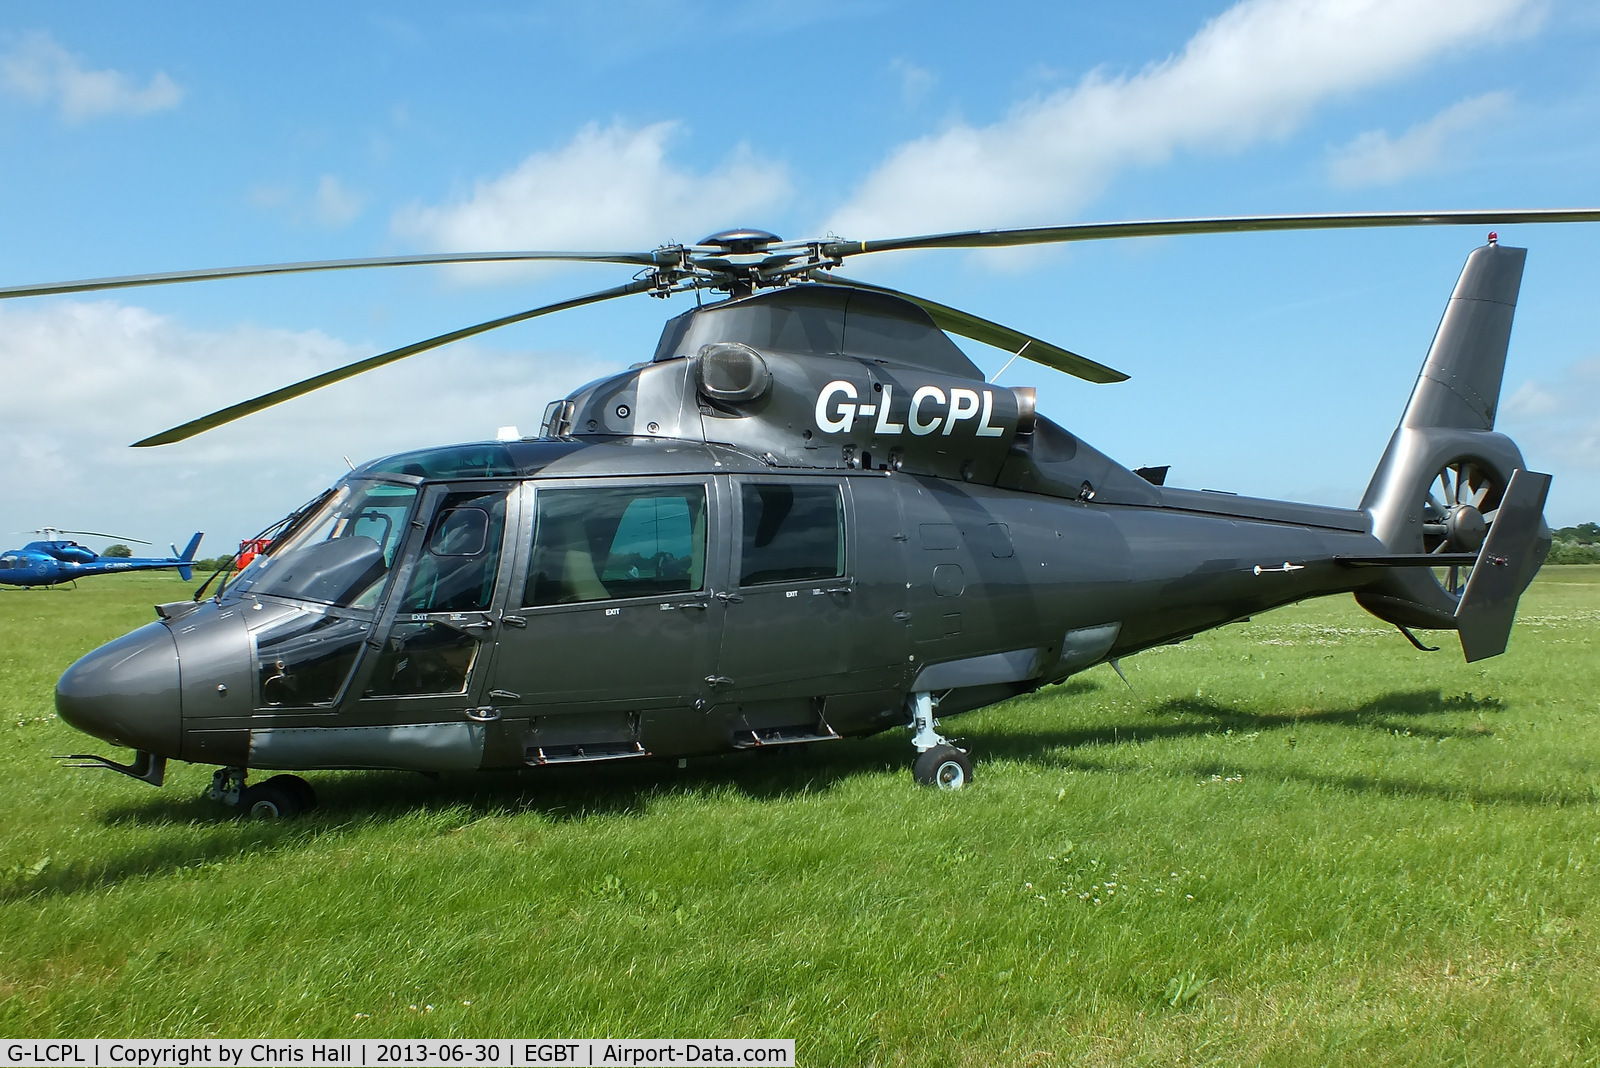 G-LCPL, 1991 Aerospatiale AS-365N-2 Dauphin C/N 6393, being used for ferrying race fans to the British F1 Grand Prix at Silverstone